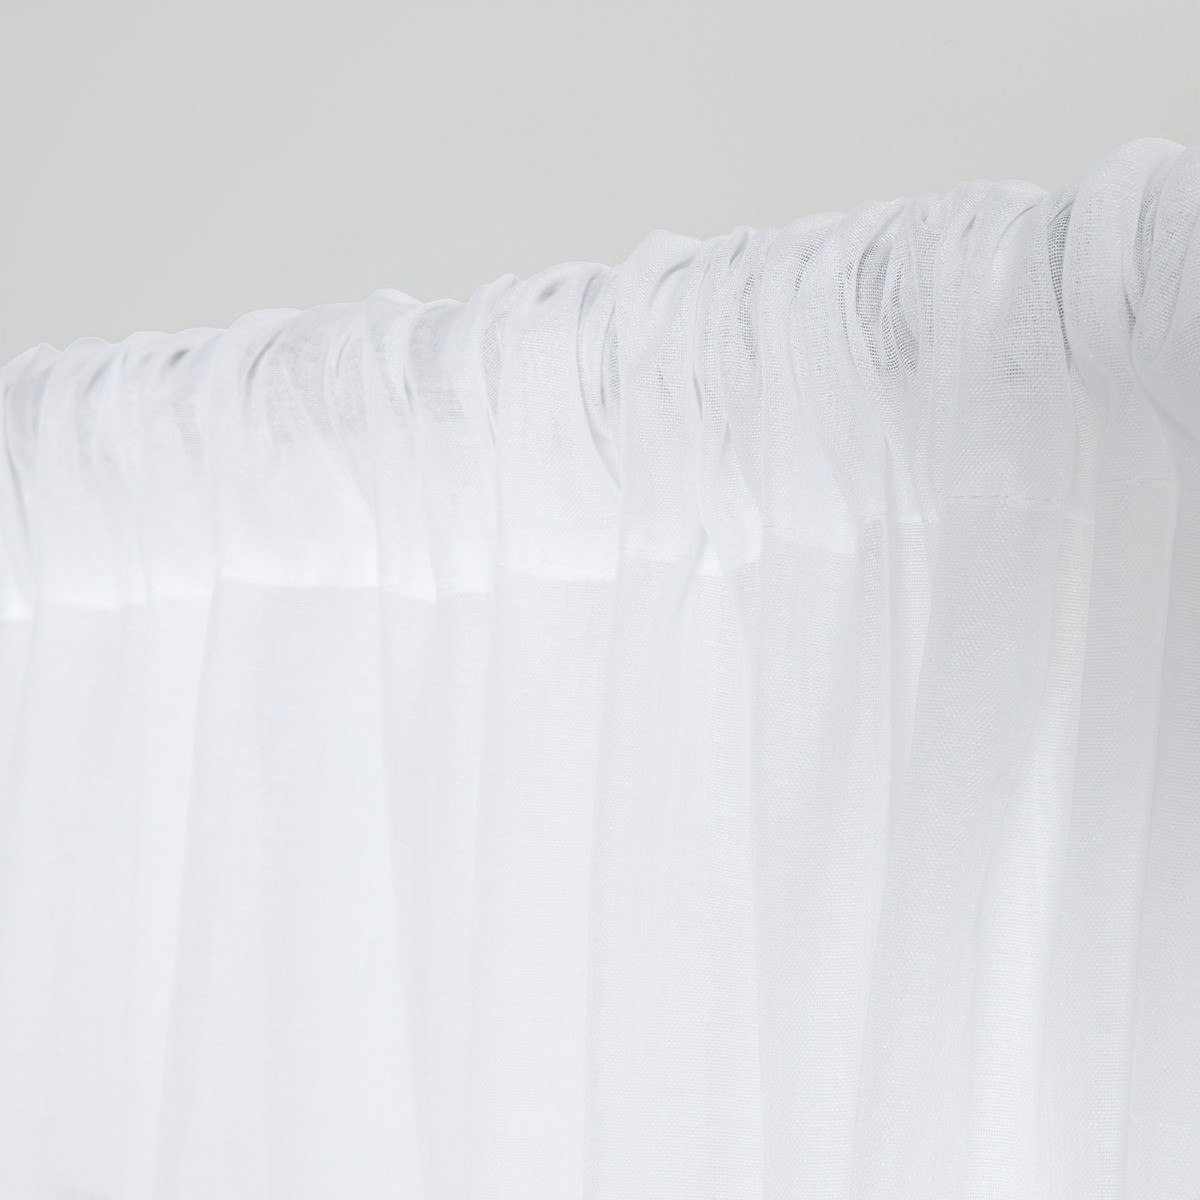 OHS Linen Look Slot Top Voile Curtains (Pair) - White>